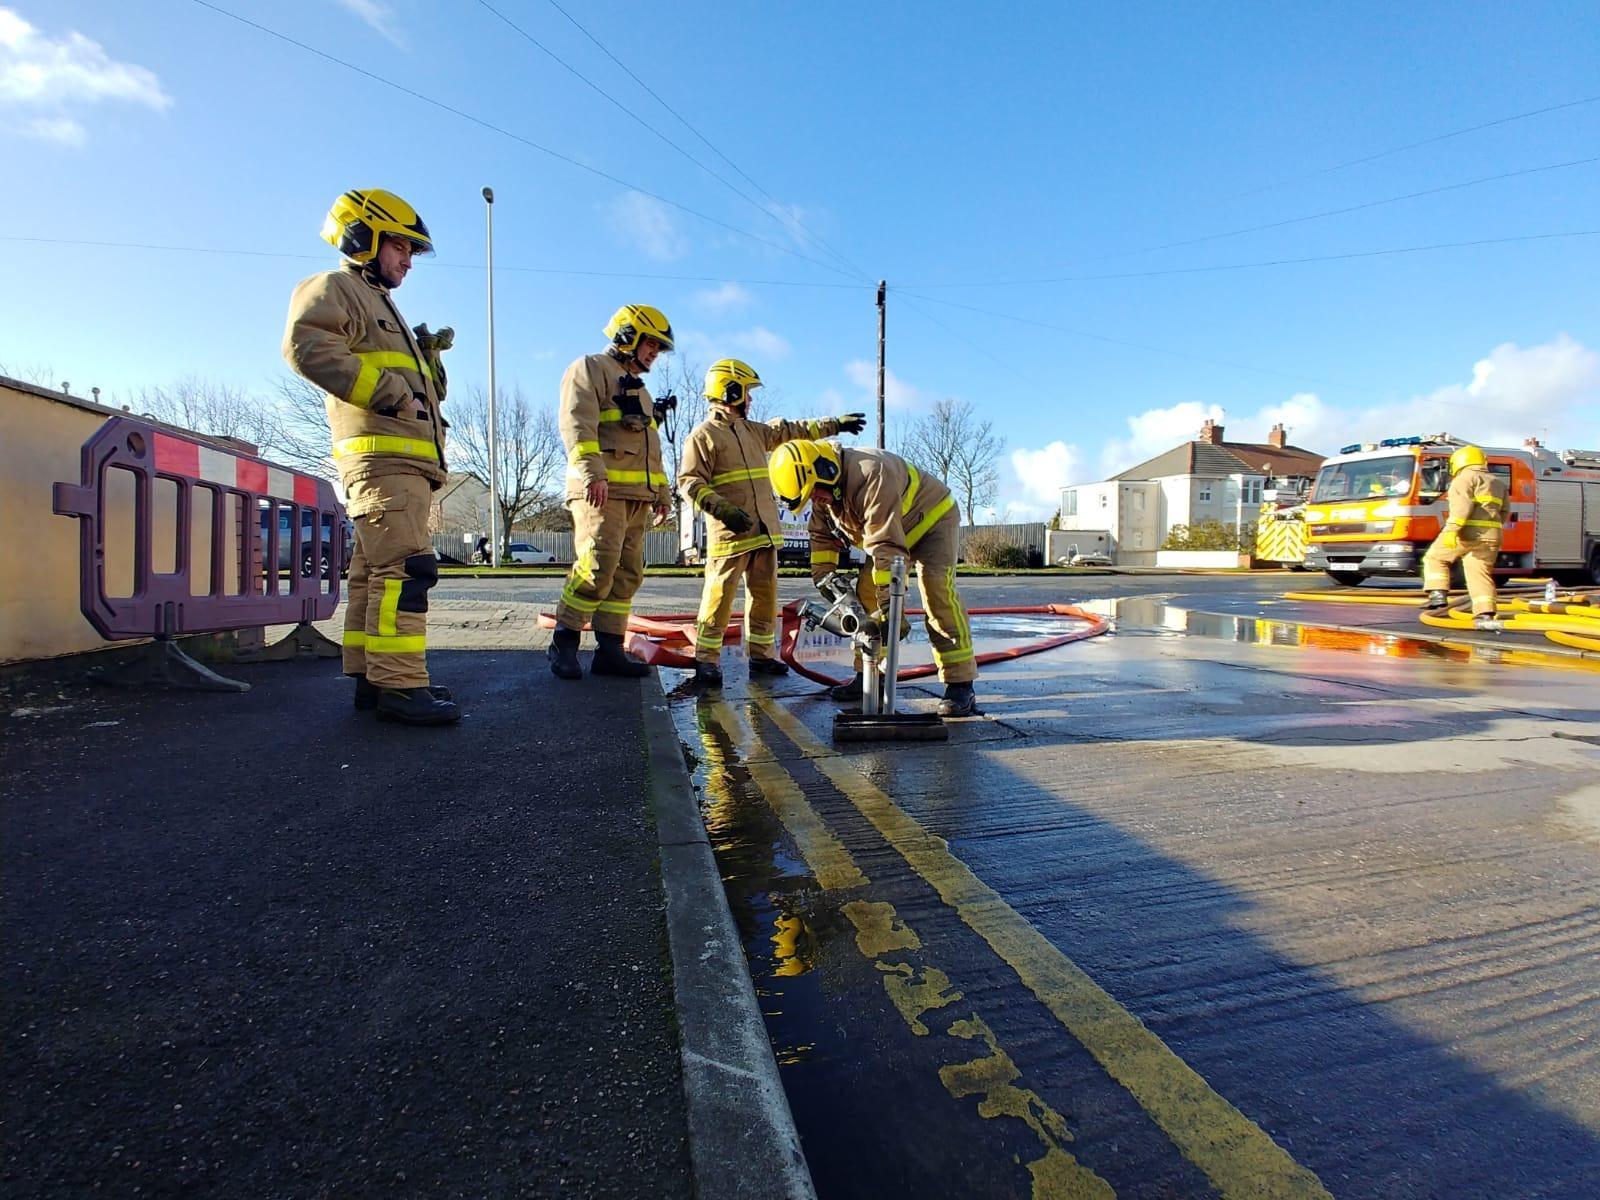 10 engines from across Blackpool and the Fylde were involved in firefighting efforts this morning (March 2)